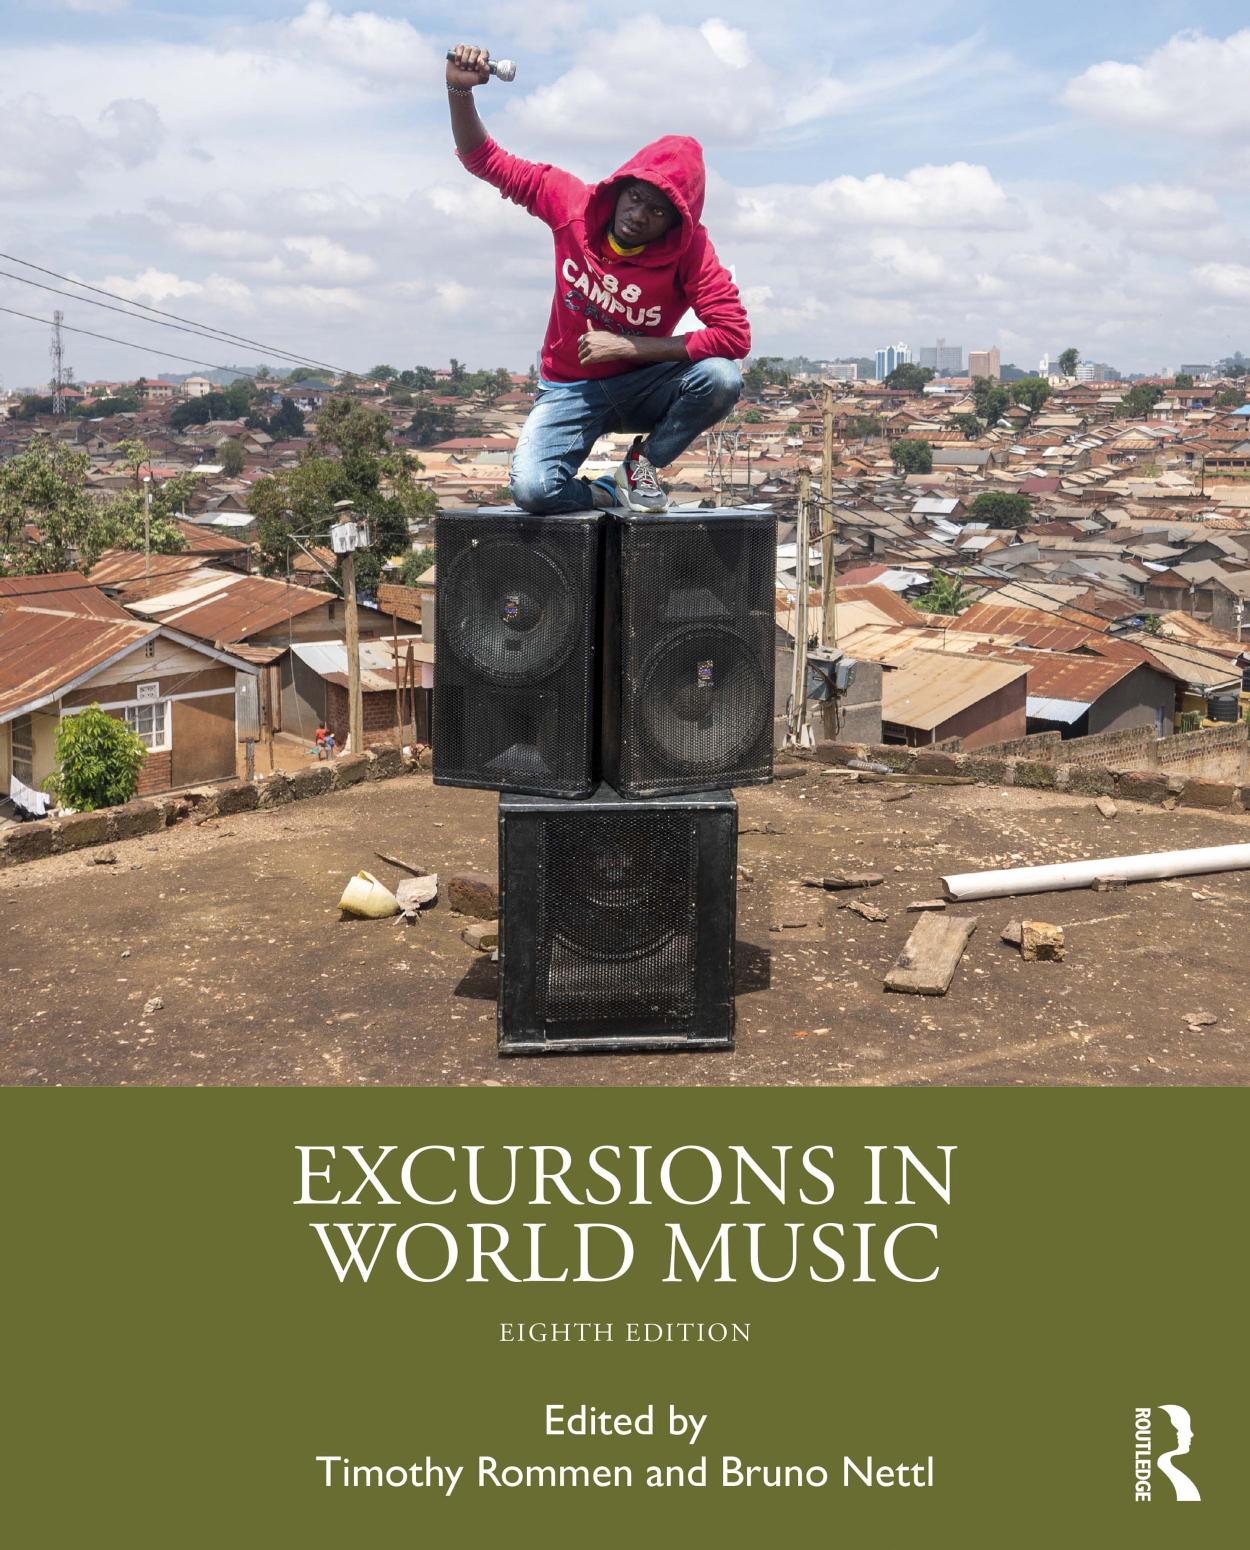 Critical Themes in World Music: A Reader for Excursions in World Music, Eighth Edition by Timothy Rommen & Brshua D. Pilzer & Chérie Rivers Ndaliko & Lei Ouyang & Jim Sykes